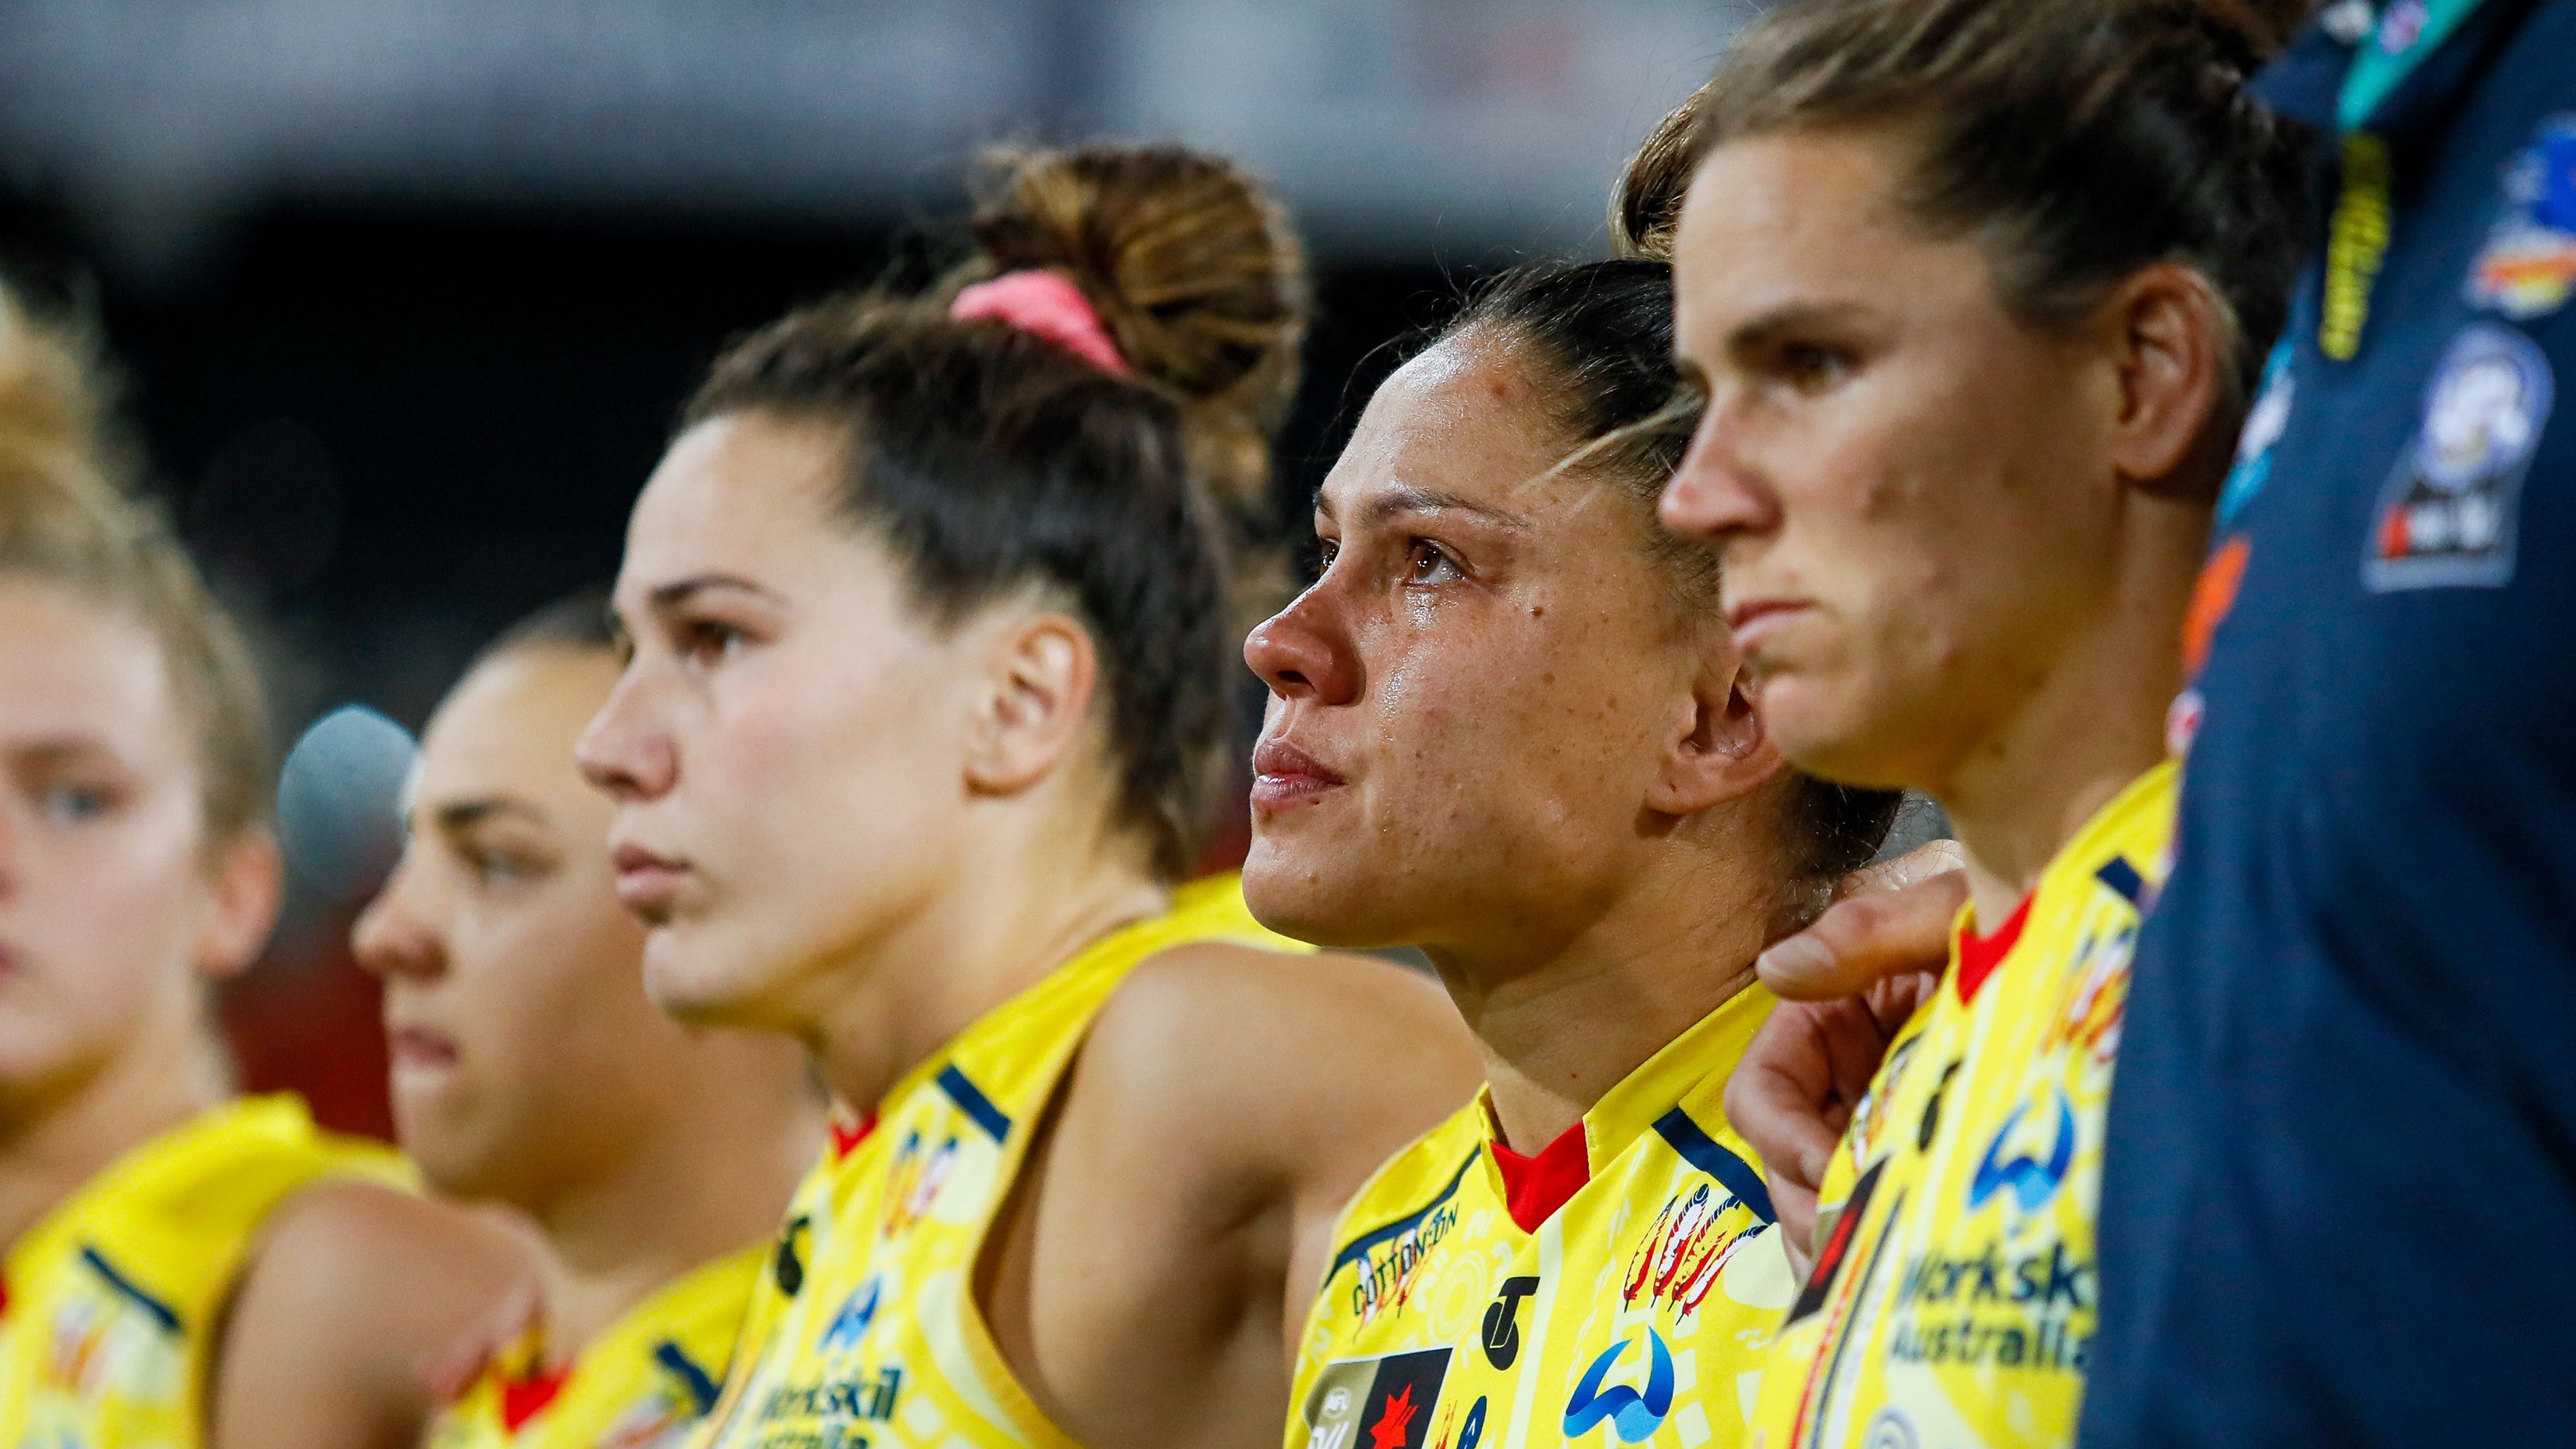 GOLD COAST, AUSTRALIA - NOVEMBER 18: Stevie-Lee Thompson of the Crows is seen getting emotional during a moments silence for former teammate Heather Anderson who passed away earlier in the week before the 2022 S7 AFLW First Preliminary Final match between the Brisbane Lions and the Adelaide Crows at Metricon Stadium on November 18, 2022 in the Gold Coast, Australia. (Photo by Dylan Burns/AFL Photos)